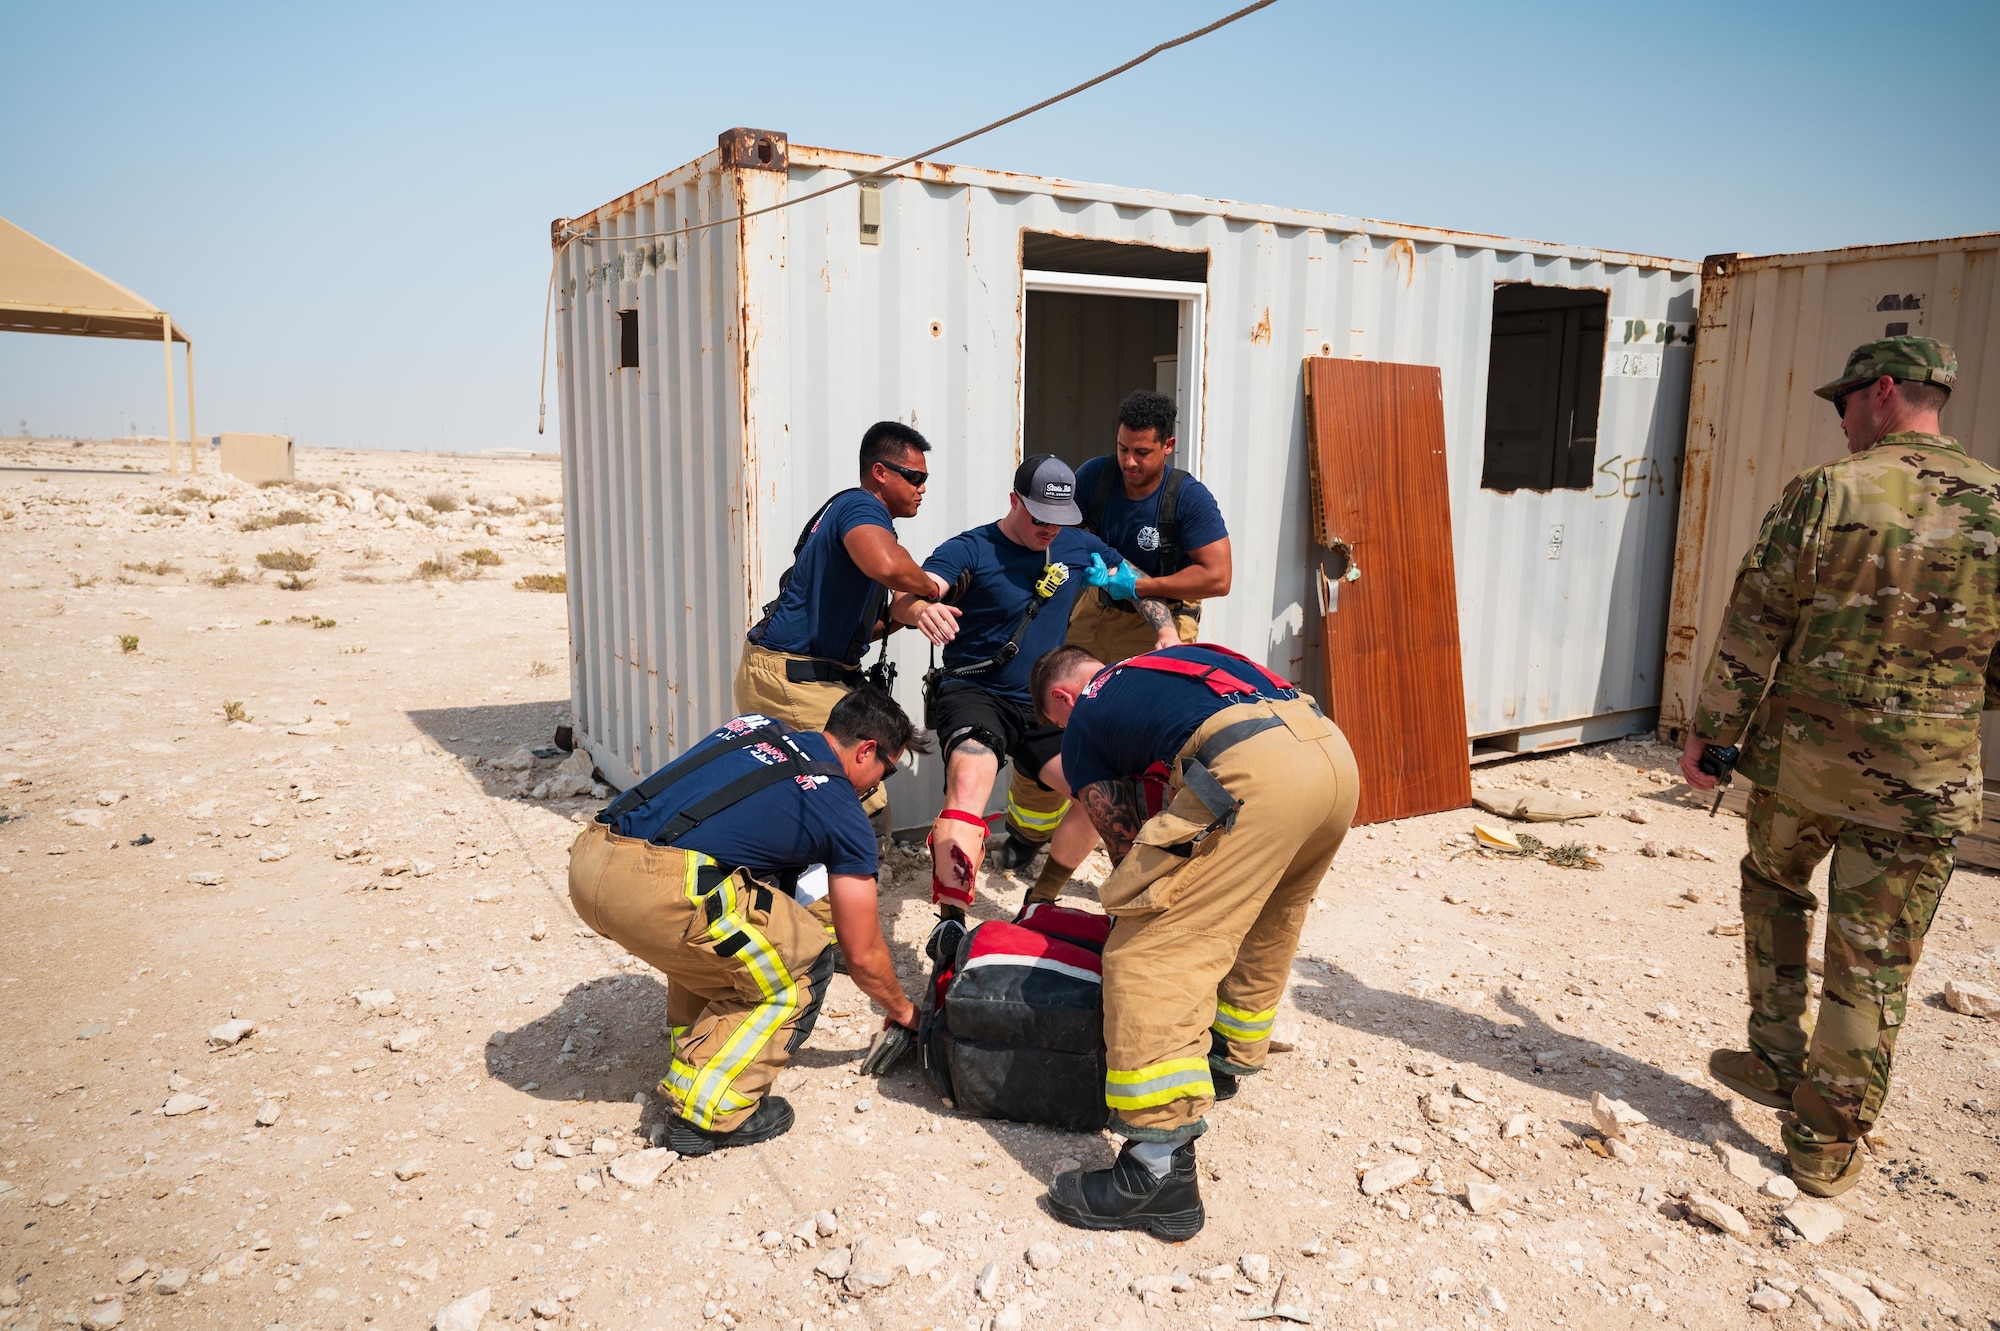 U.S. Air Force firefighters from the 379th Expeditionary Civil Engineer Squadron assist Senior Airman Colton Kelly (center) a simulated casualty during an exercise Aug. 24, 2022 at Al Udeid Air Base, Qatar. The firefighters were evaluated on their emergency response to Kelly’s simulated leg wound, caused by stepping on explosive ordnance. (U.S. Air Force photo by Staff Sgt. Dana Tourtellotte)